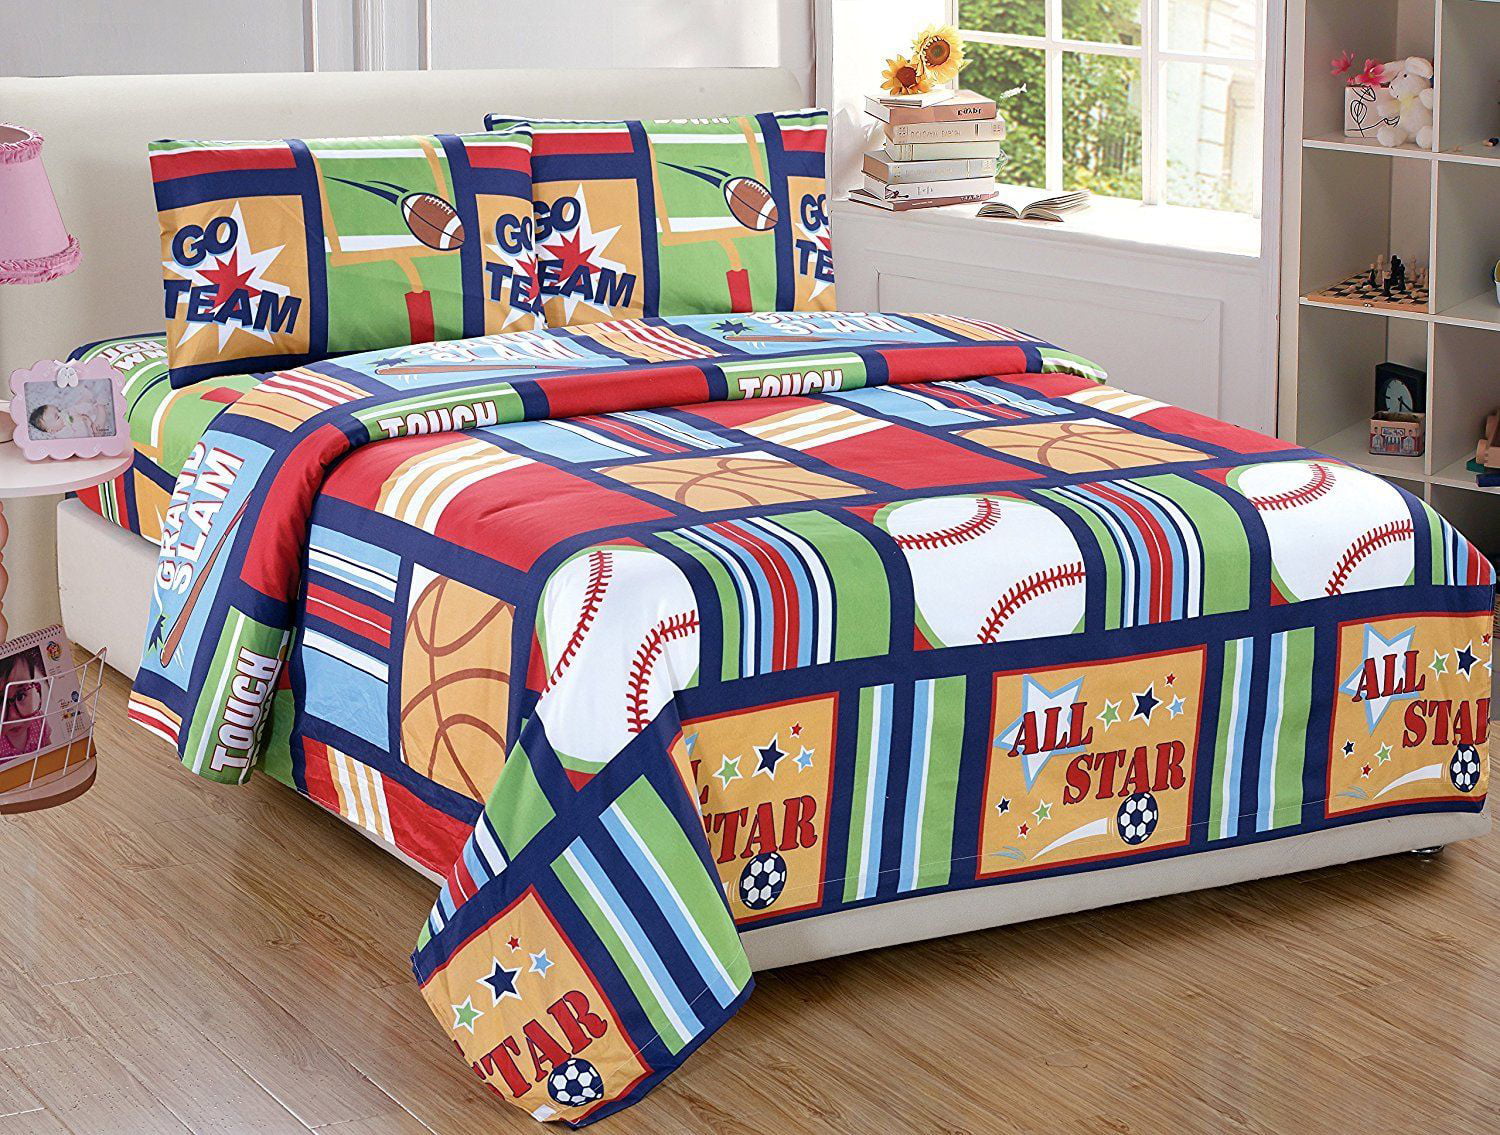 1 Flat & 1 Fitted Sheet 15 Deep Durable Super-Soft Construction & Tractor Print 2 Pillow Cases 4 Pc Kids Bedding Set Chital Full Bed Sheets for Boys Double-Brushed Microfiber 